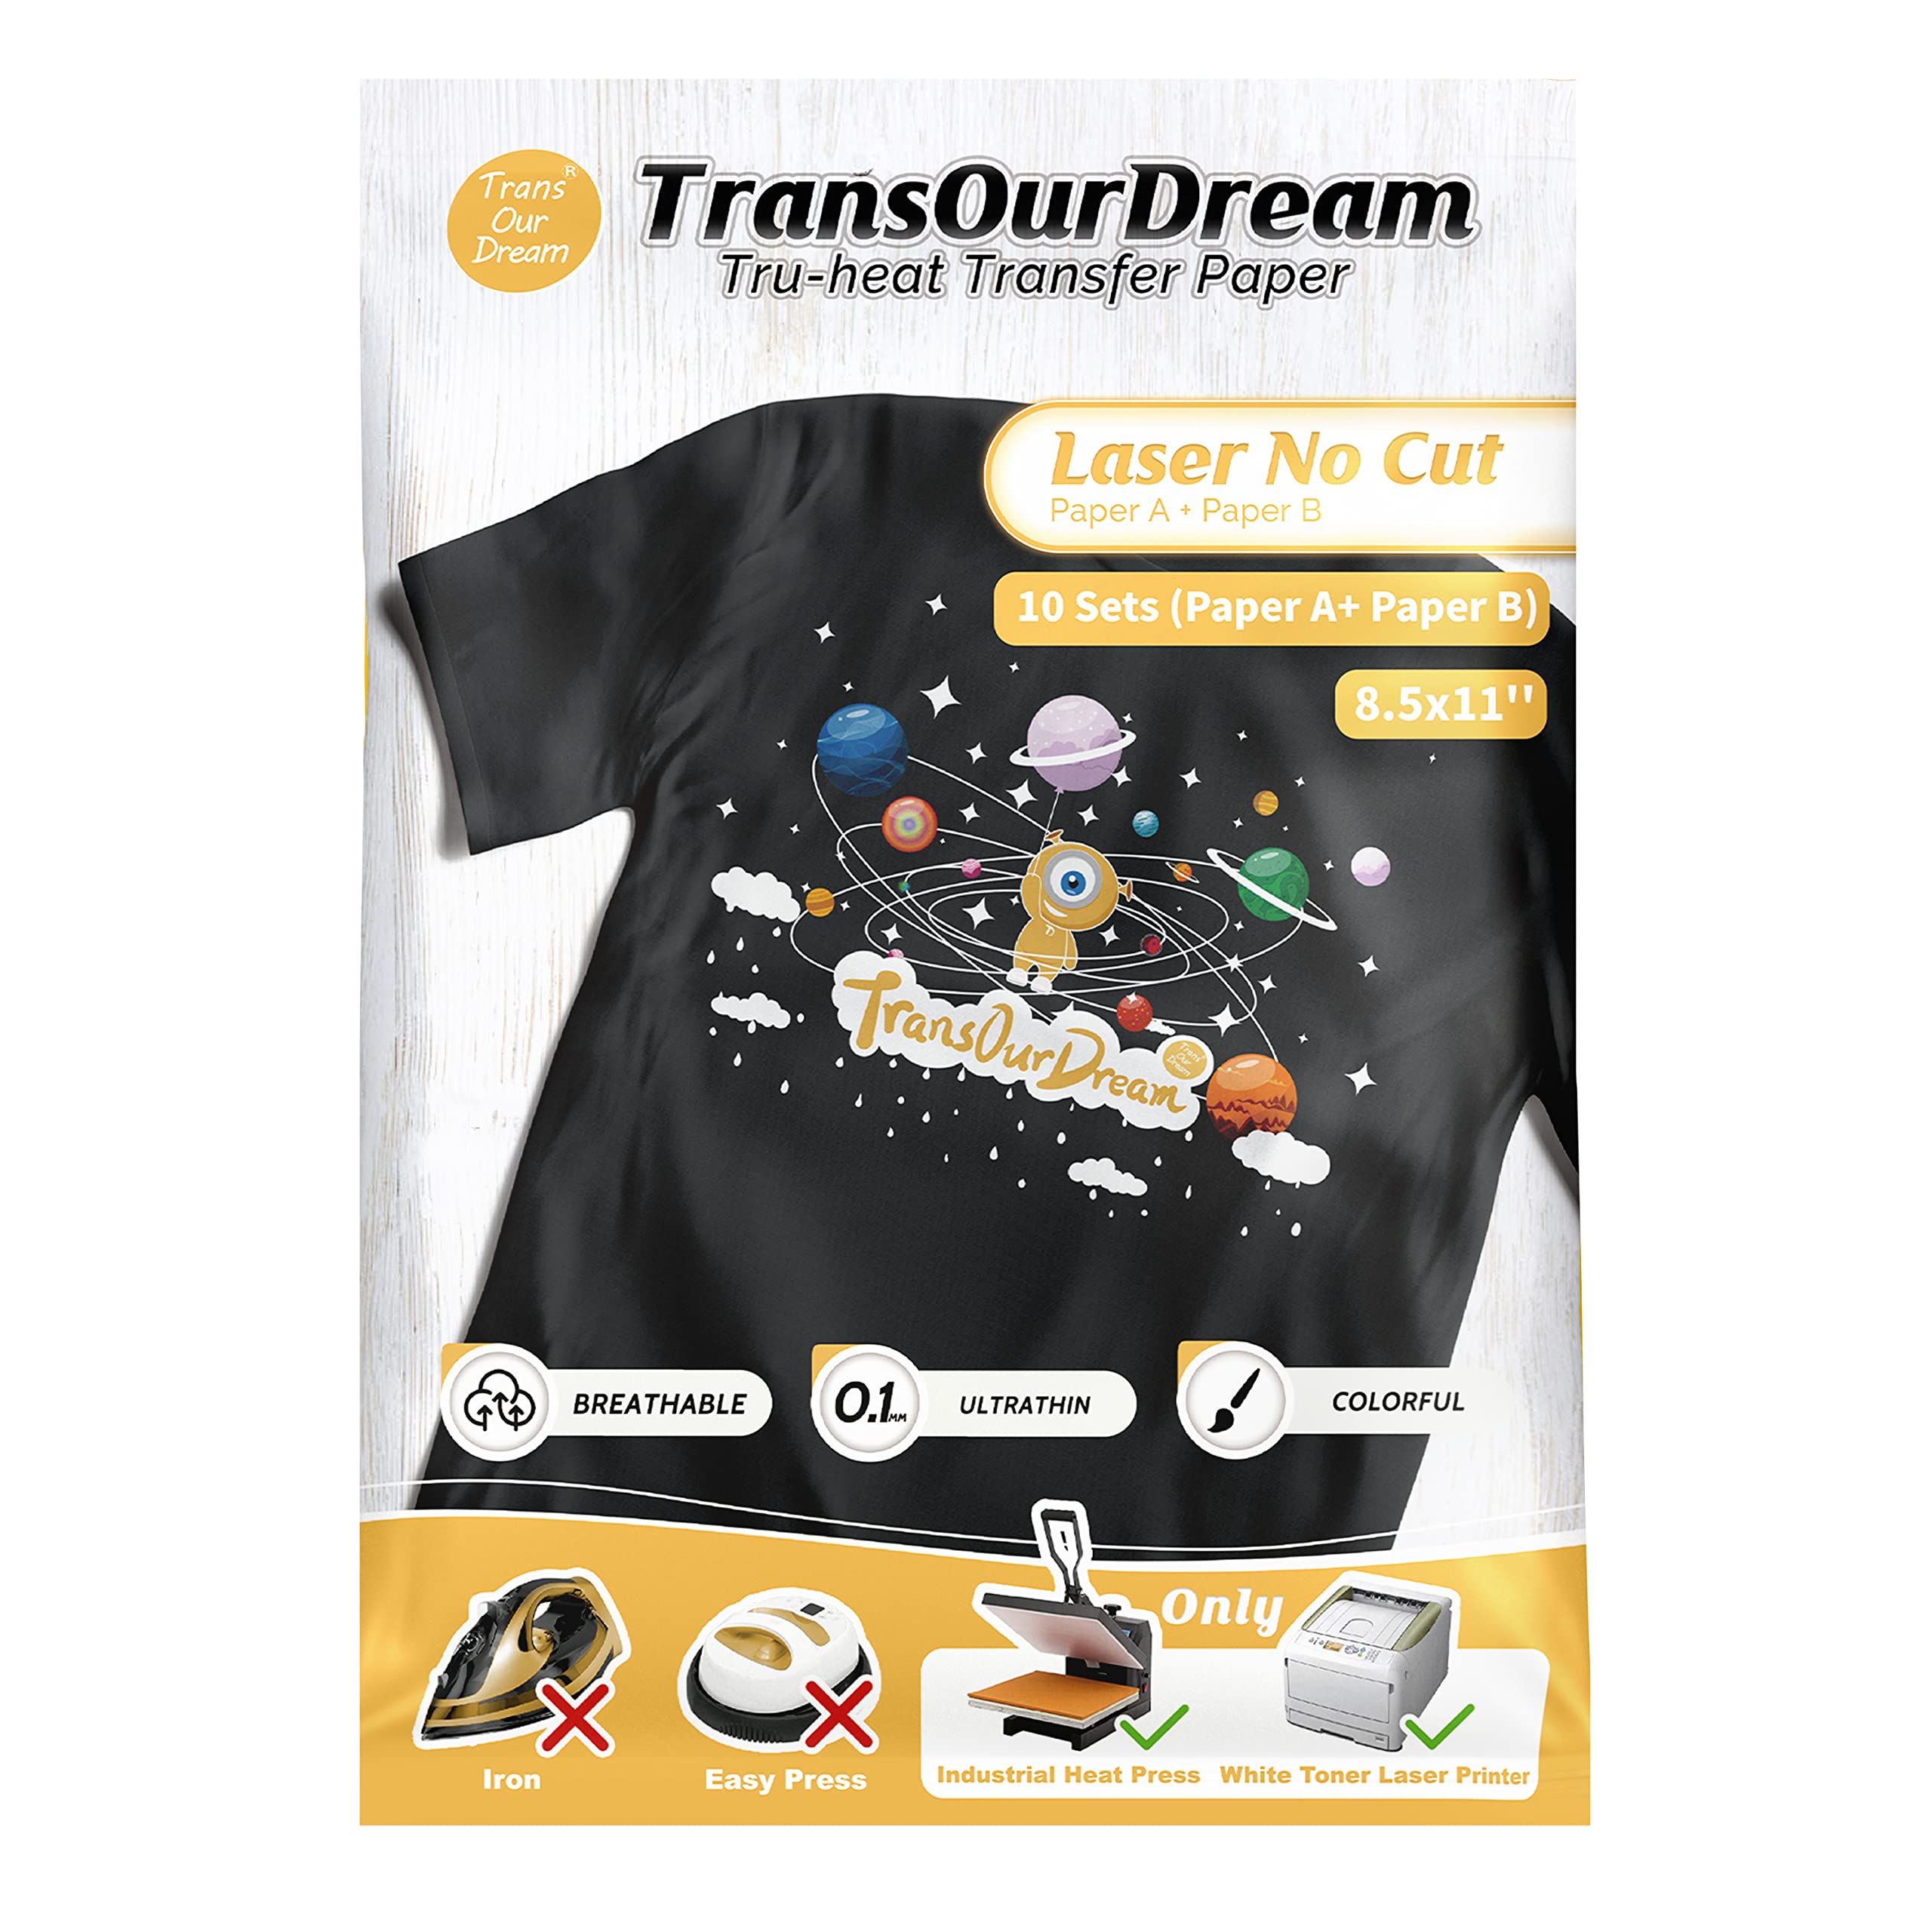 👕 17 Picks: Best Printer for Heat Transfer Paper for T-Shirts in